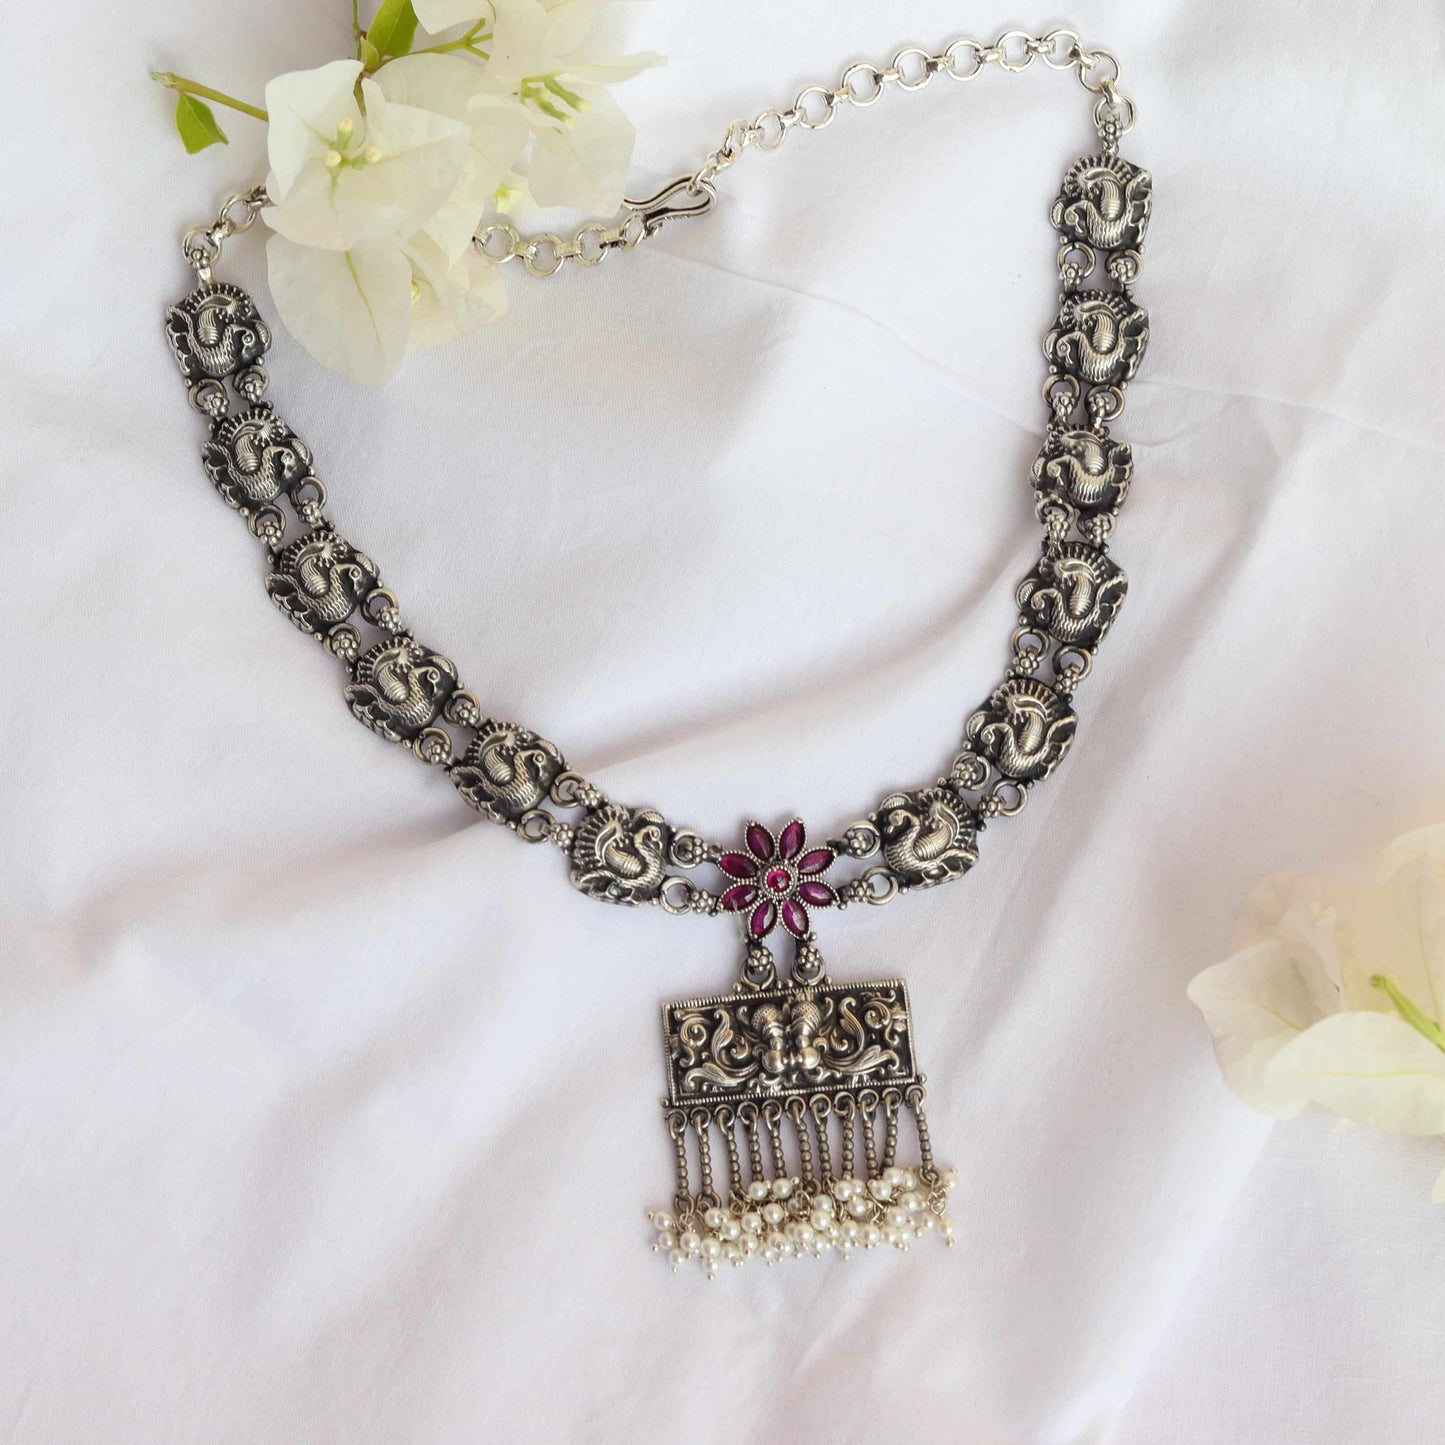 necklace online shopping